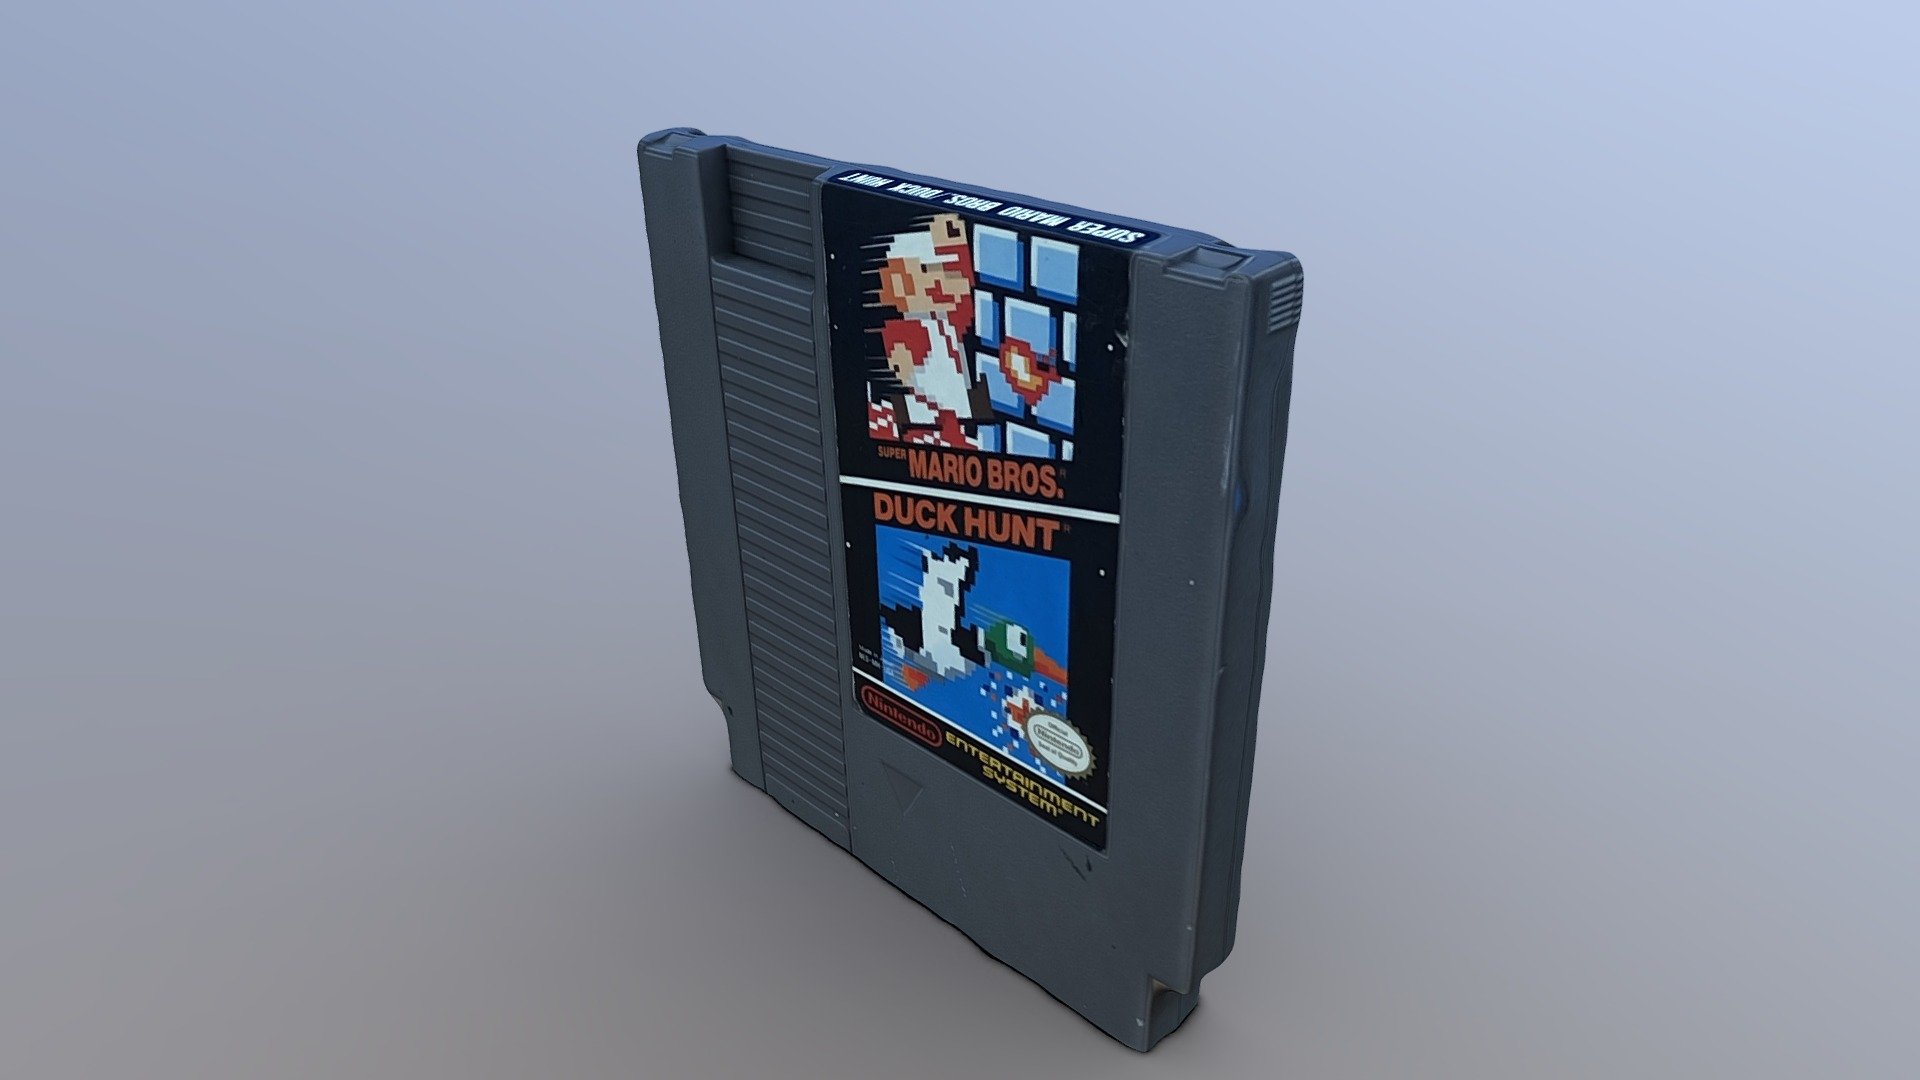 Created using photogrammetry for the Vintage Video museum
Classic Nintendo entertainment system game super mario bros/duck hunt

vintagevideomuseum.com

Scan By austin Beaulier
Austinbeaulier.com - Super Mario Bros. / Duck Hunt NES Cartridge - Download Free 3D model by Austin Beaulier (@Austin.Beaulier) 3d model